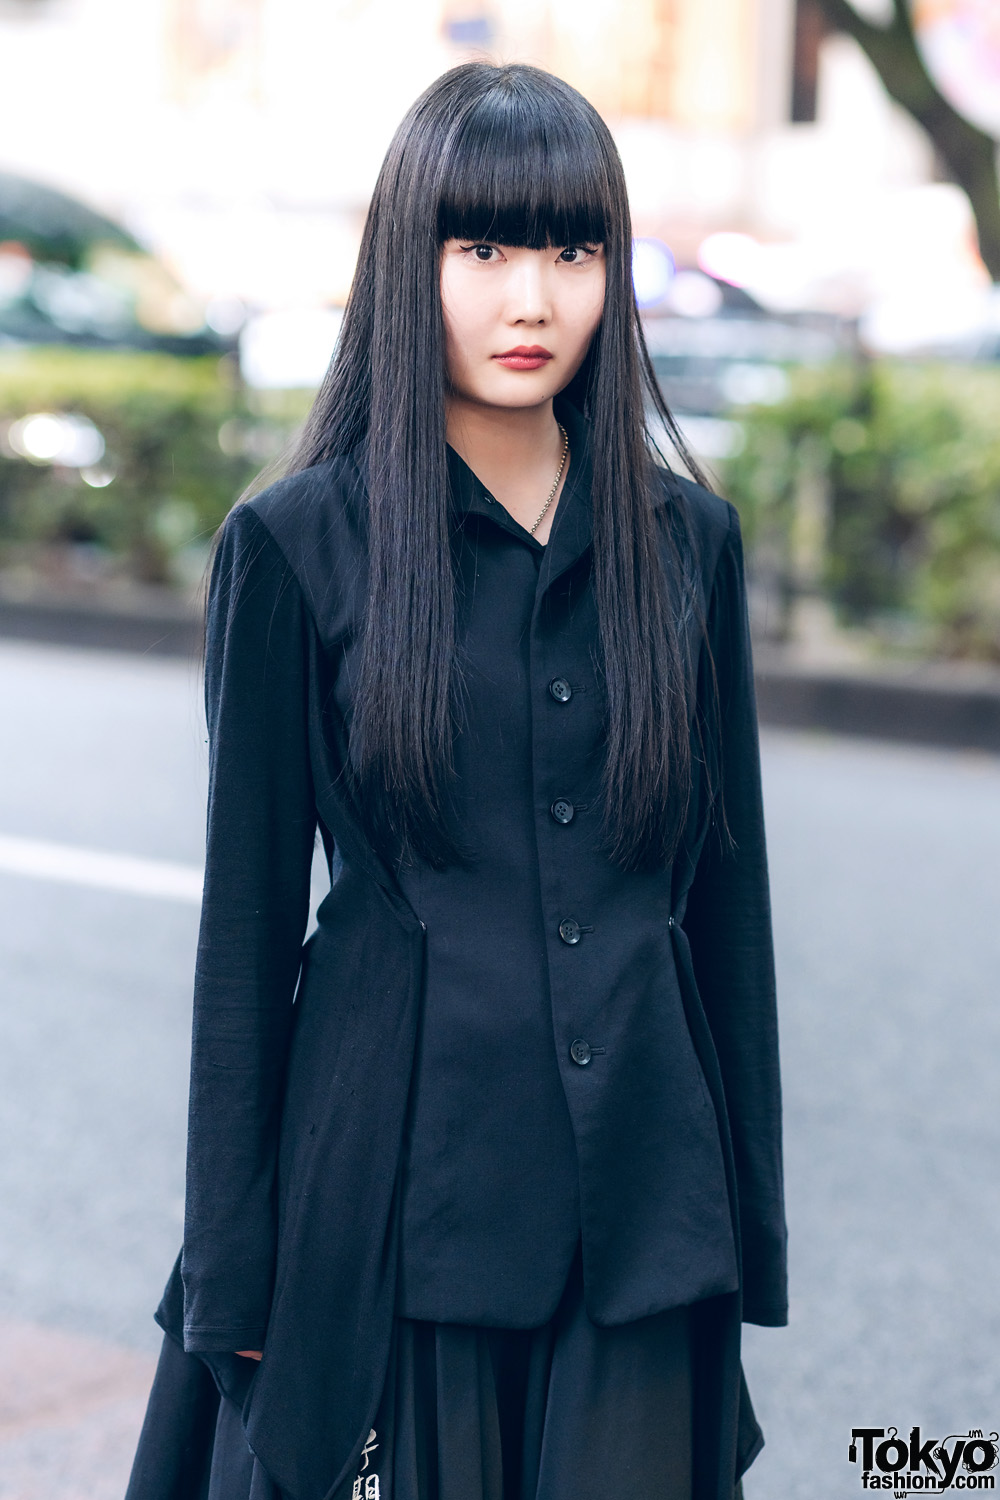 Japanese Hair Stylists in Layered Monochrome Street Styles w/ The